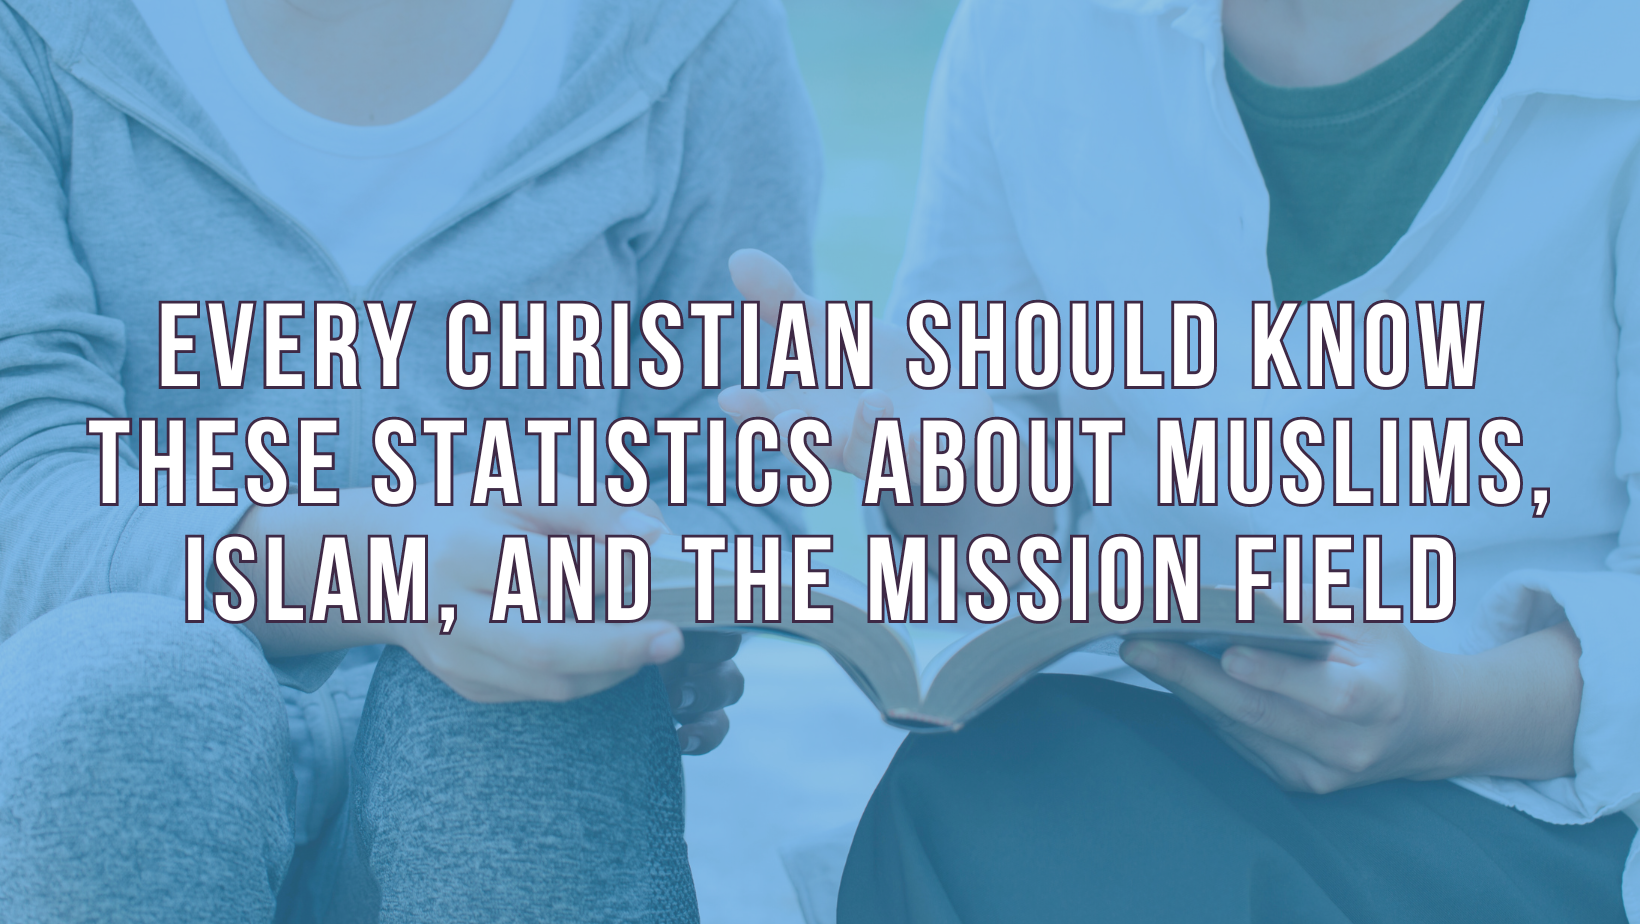 Every Christian should know these statistics about Muslims, Islam, and the mission field